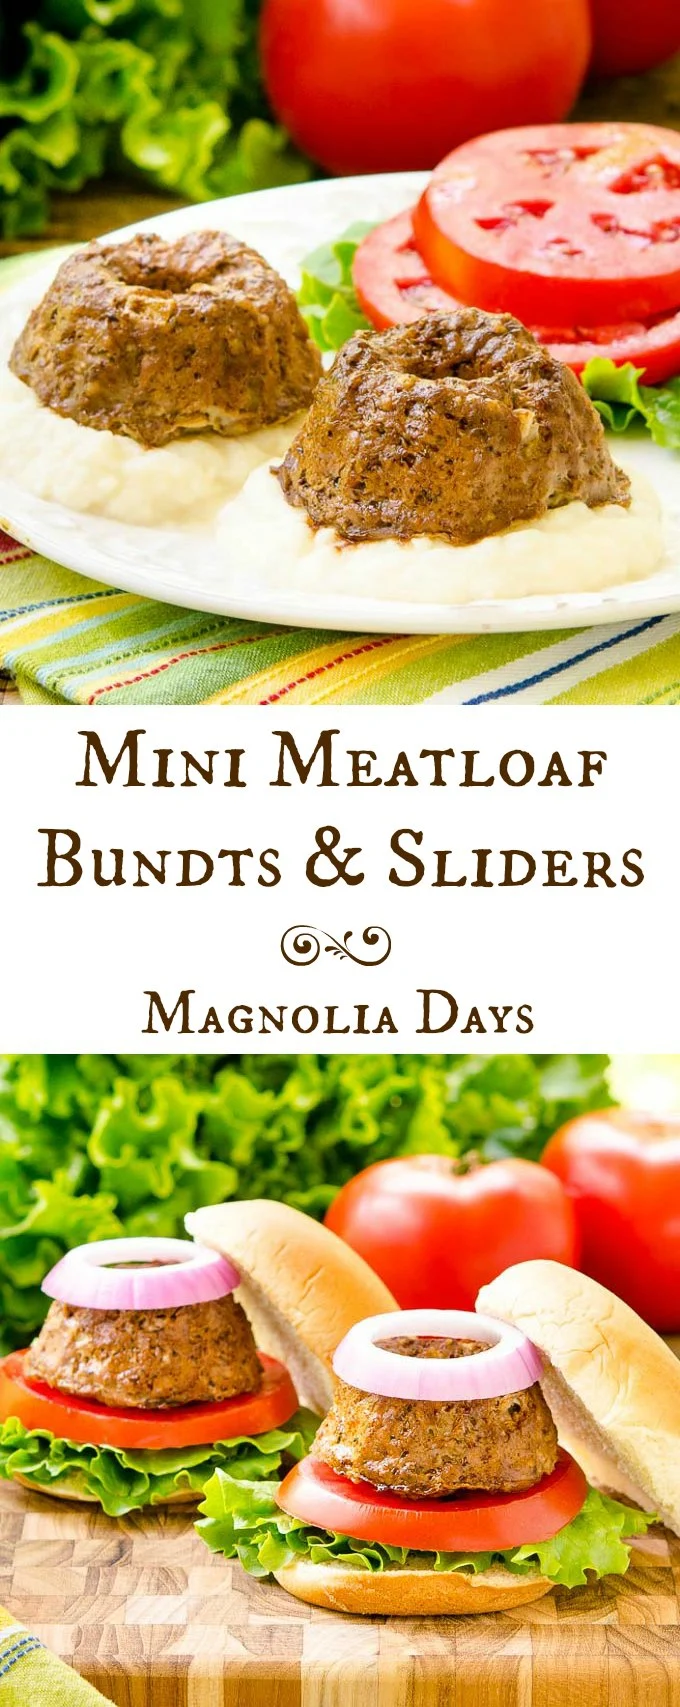 Mini Meatloaf Bundts and Sliders are a fun way to serve a classic dish. It brings new life to the old with a surprising and unique twist.